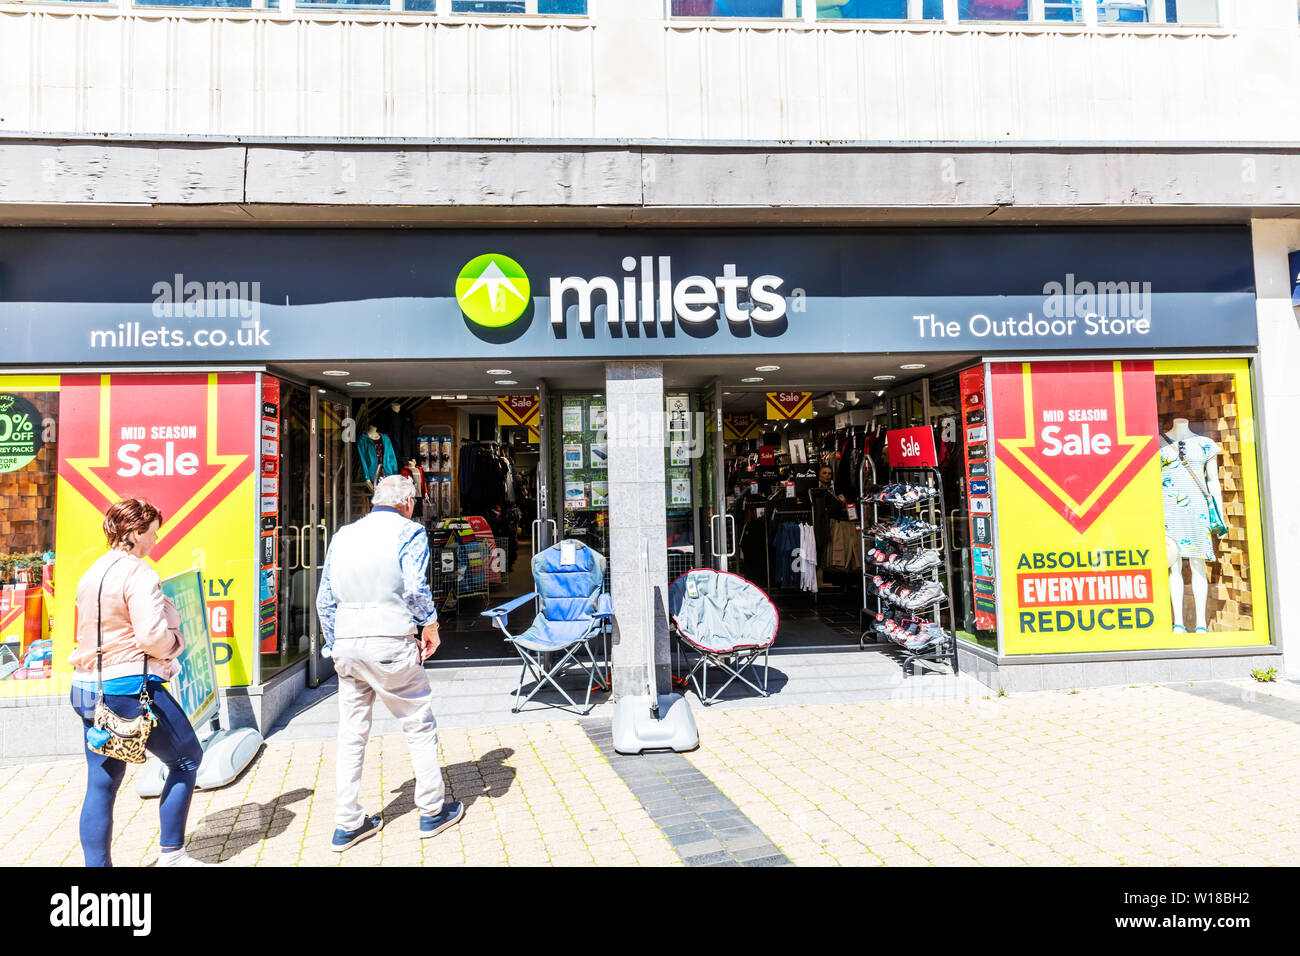 Millets outdoor clothing store, Millets shop, Millets store, Millets sign, Millets logo, Millets outdoor clothing shop, Millets, outdoor clothing, UK Stock Photo